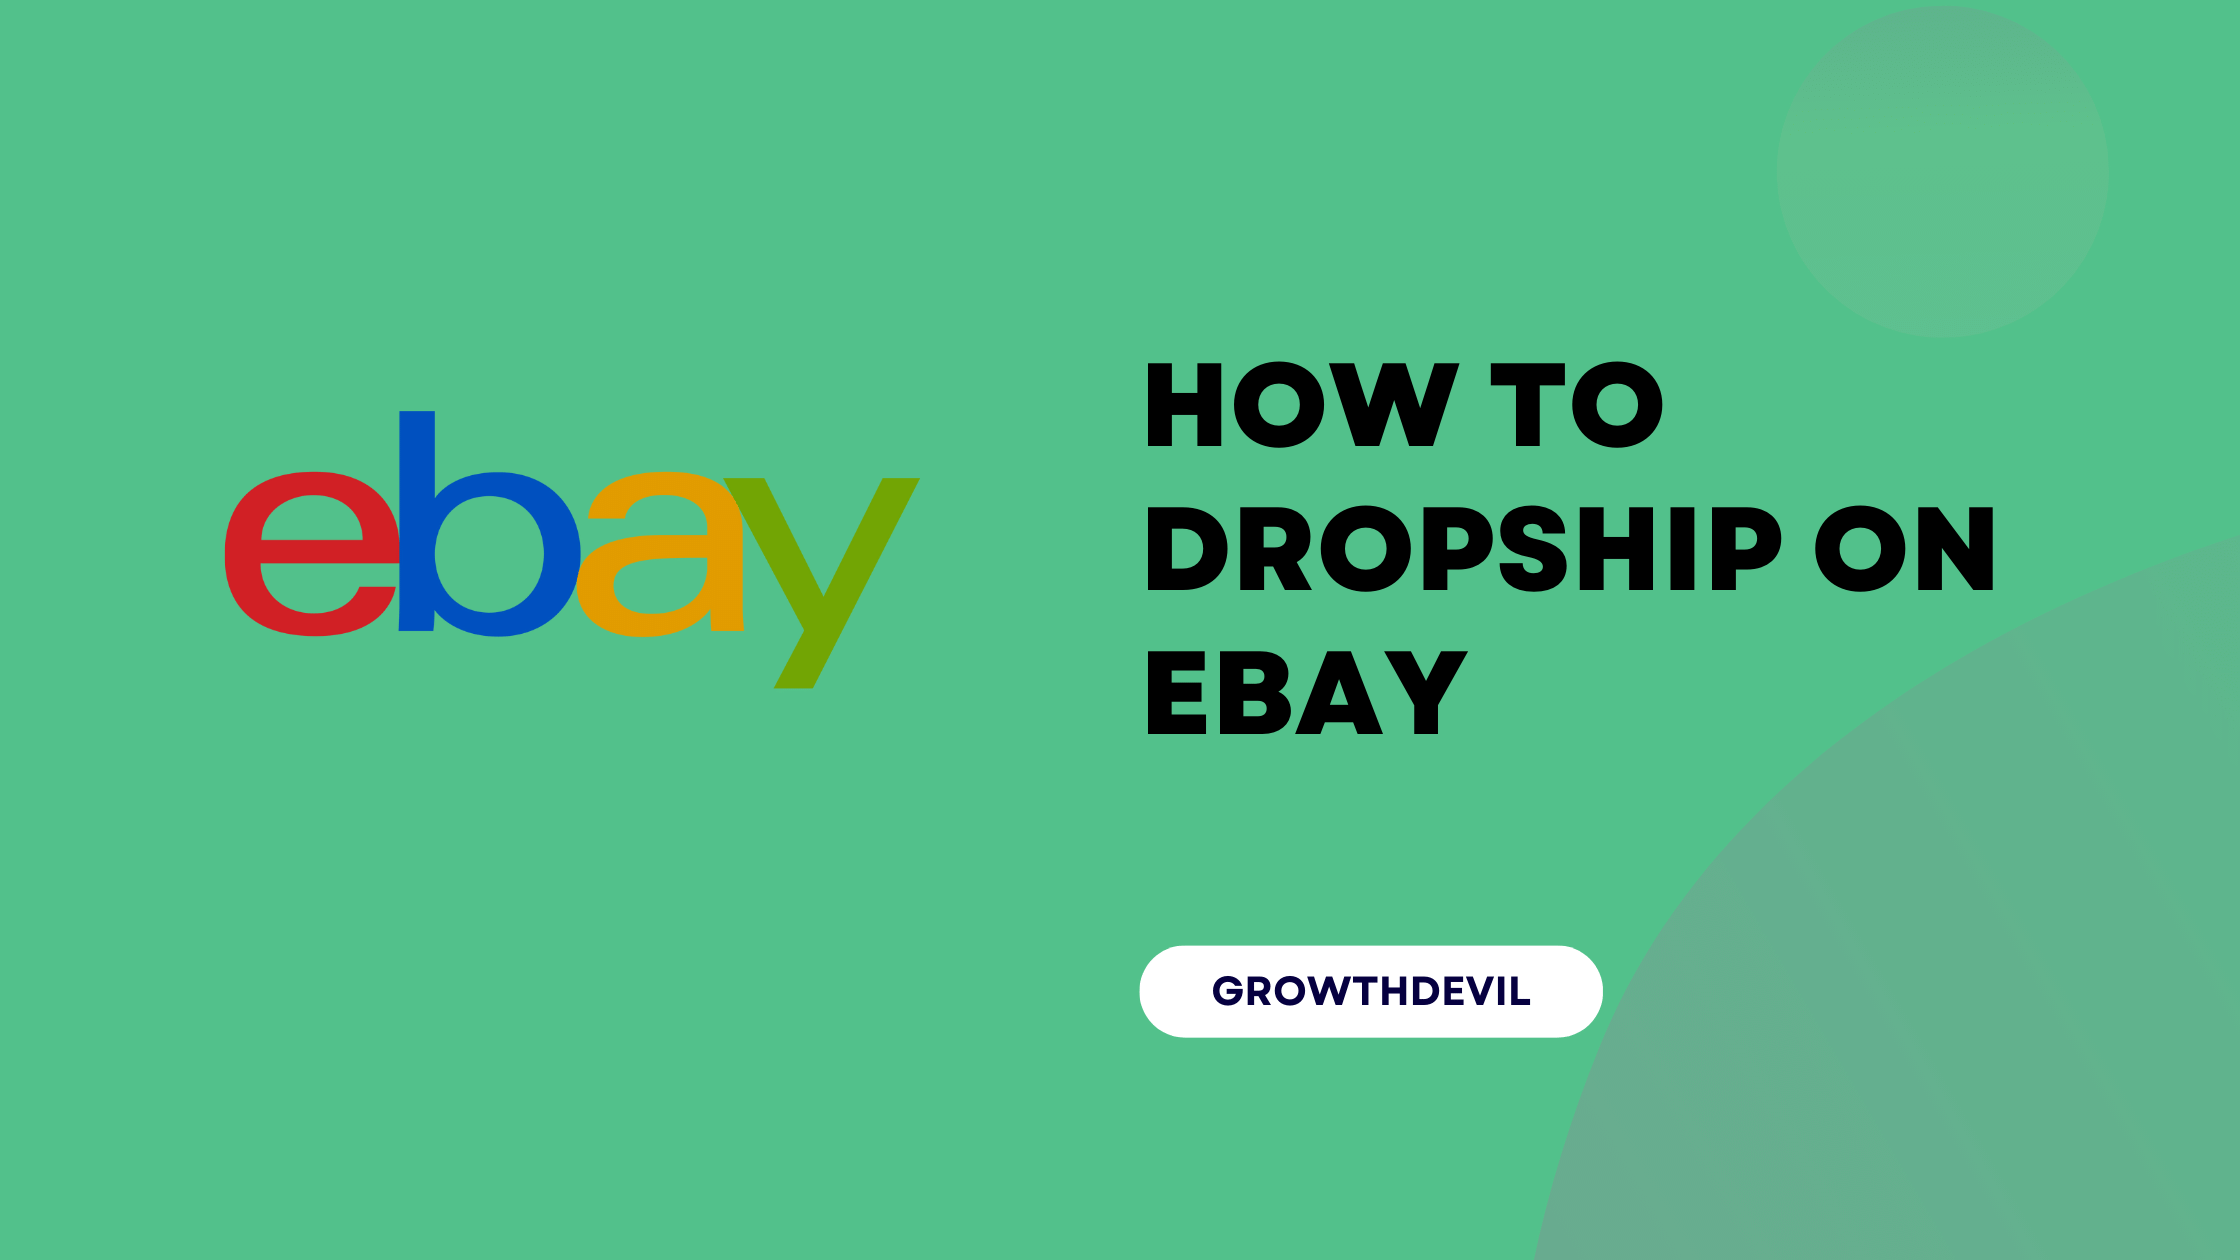 How To Dropship On eBay - GrowthDevil